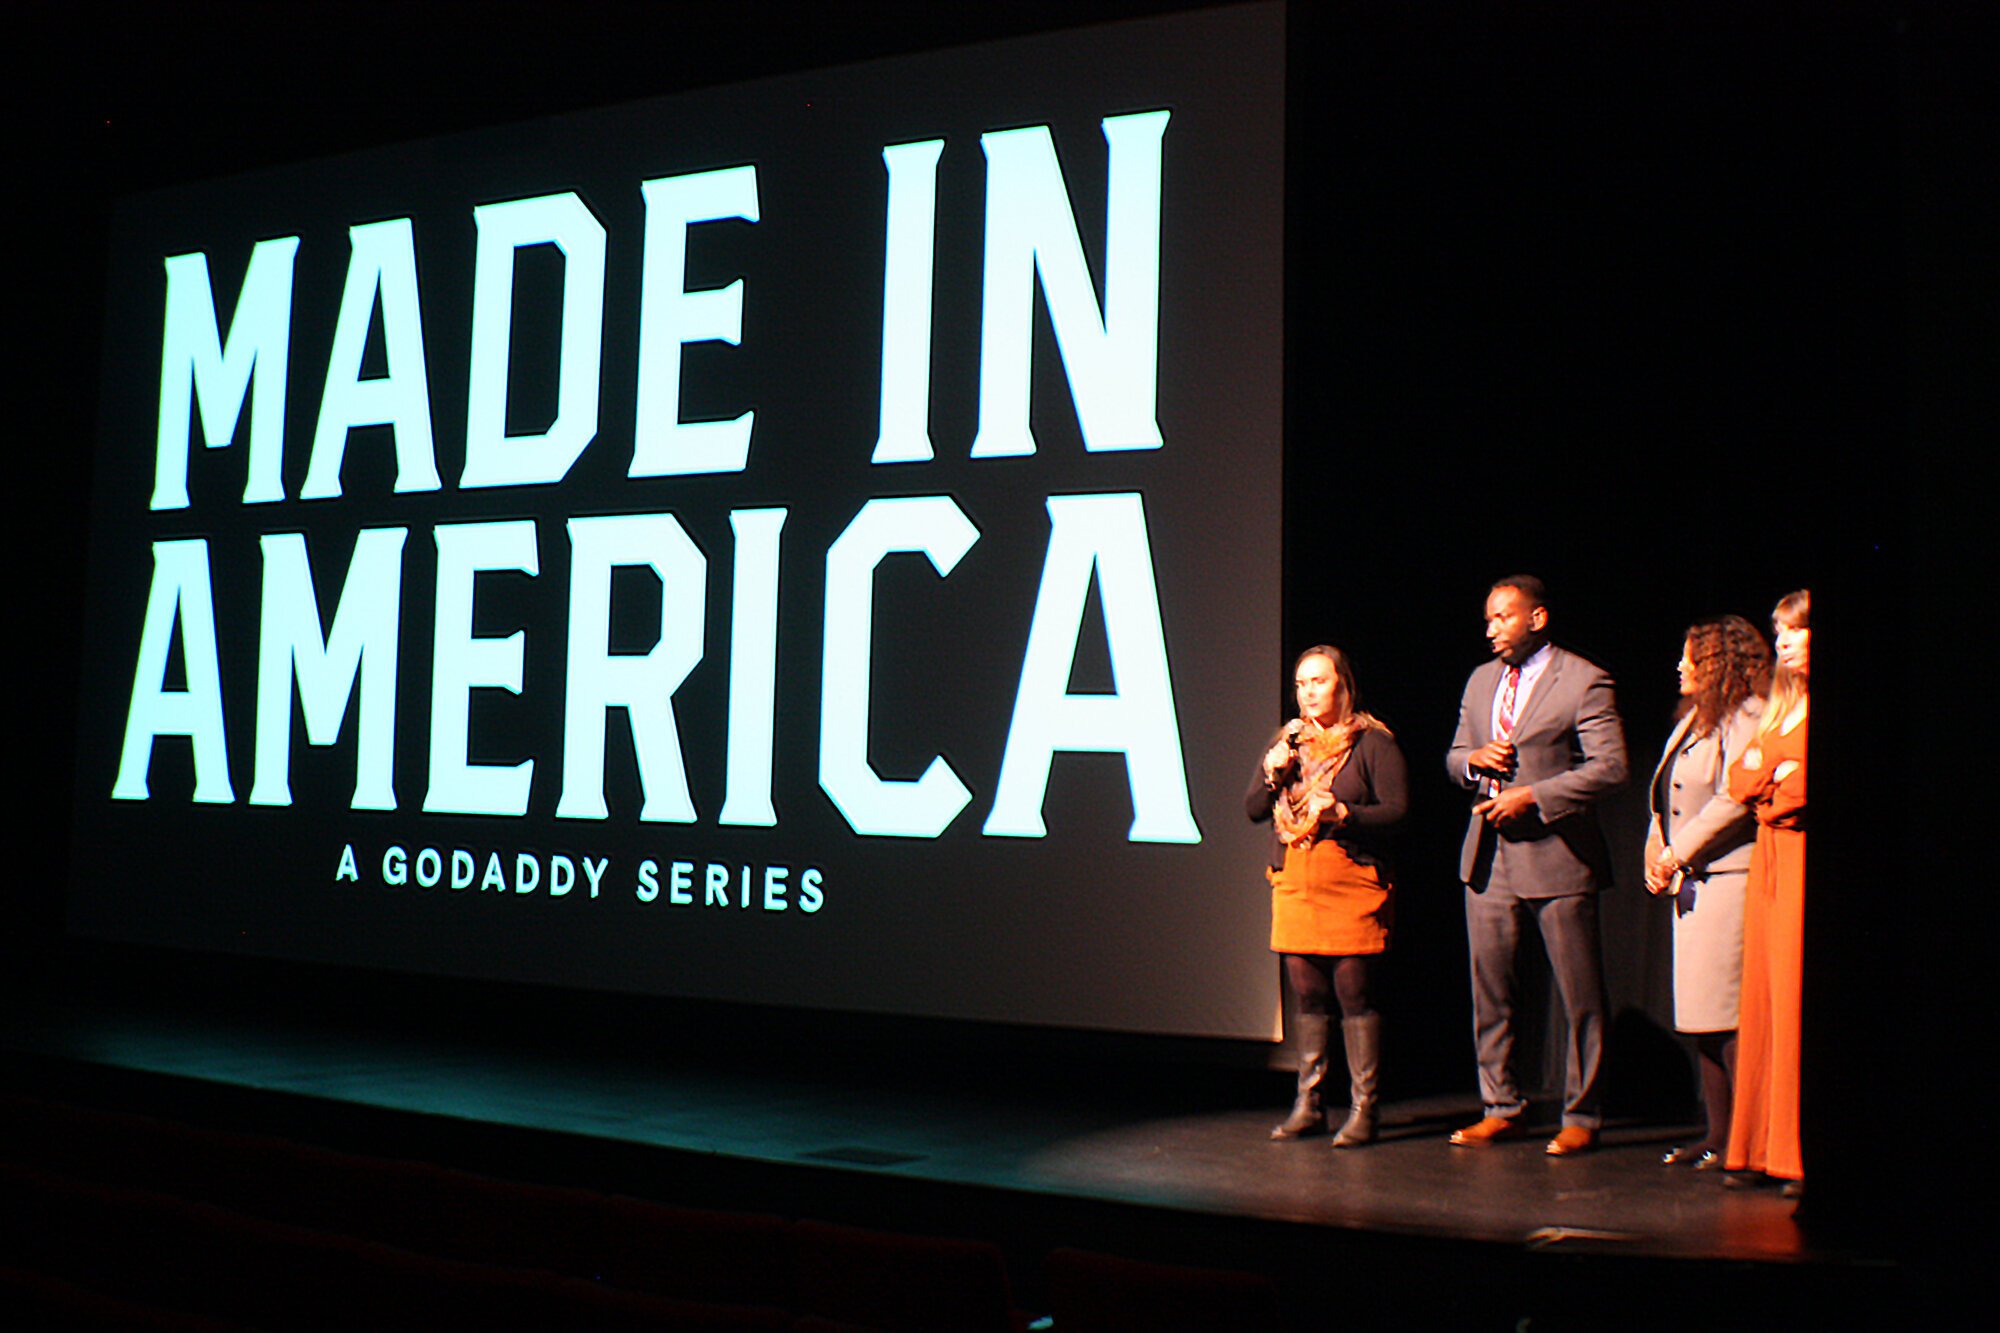 GoDaddy's Made in America docu-series premiered in Memphis on November 22. Its first episodes feature Memphis-area entrepreneurs. Stacy Cline stands at the far left. (Cole Bradley, High Ground News)